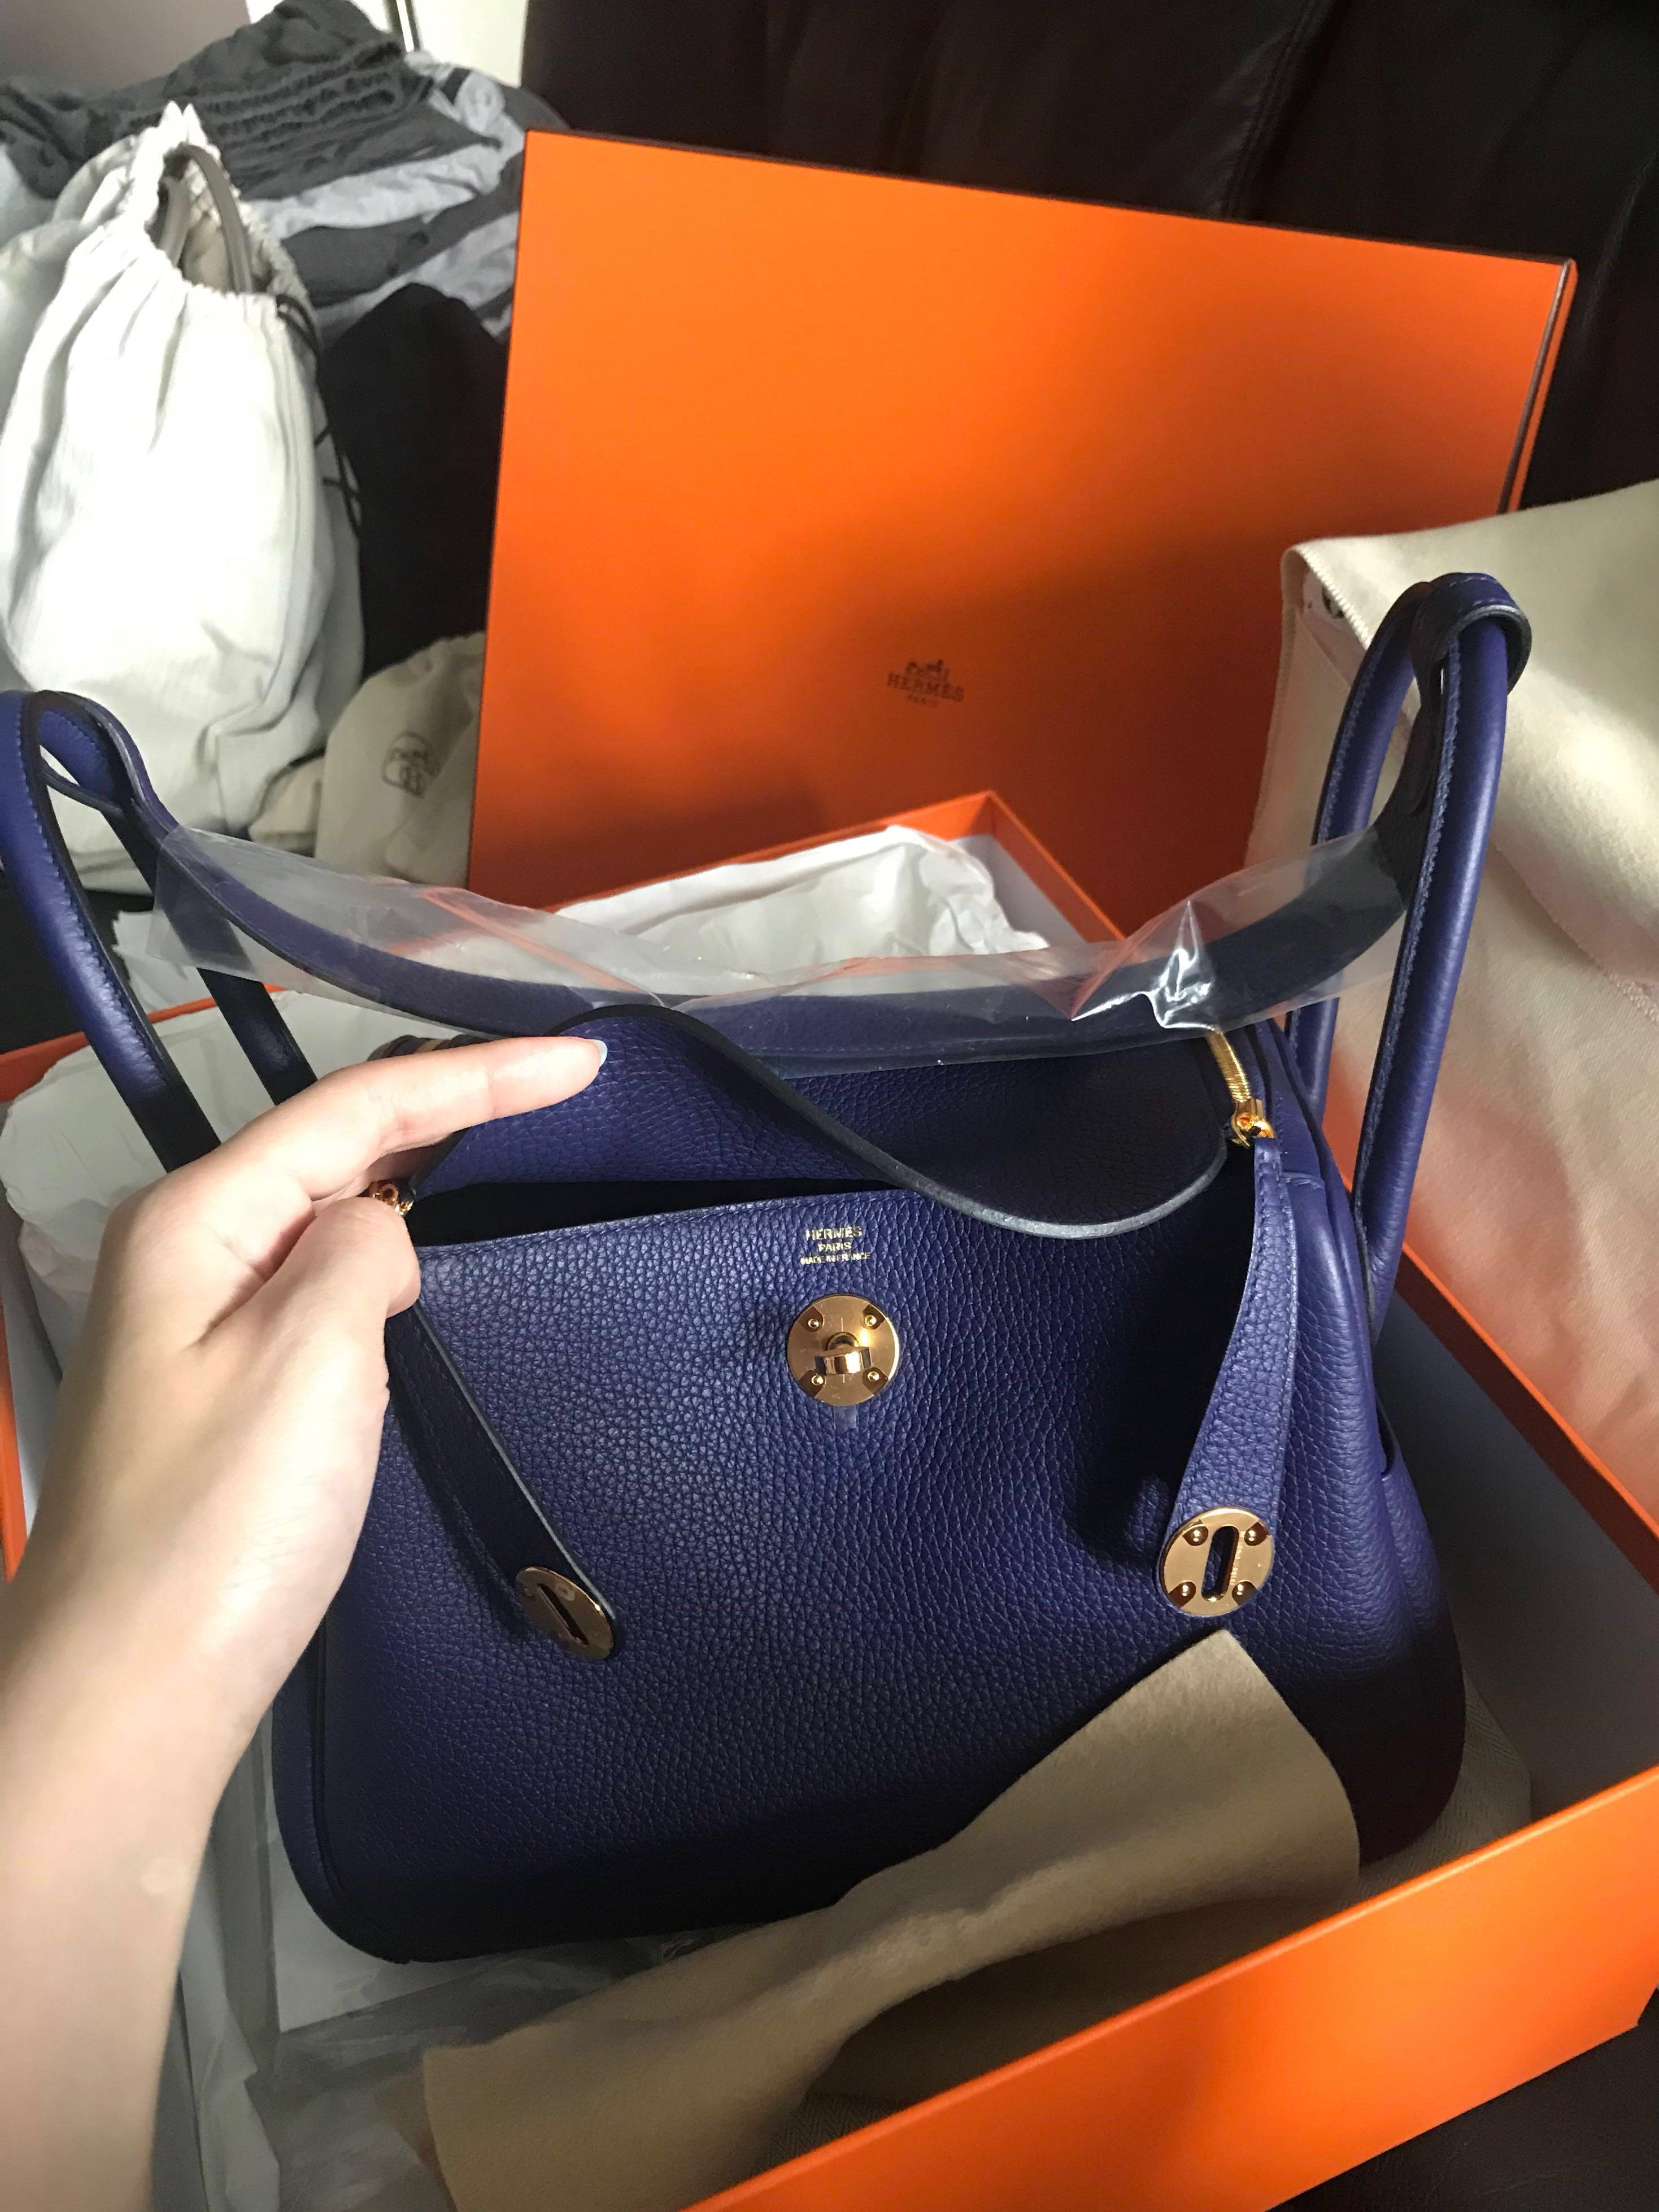 🦄💖 Hermes Mini Lindy (Biscuit, GHW, Clemence) (Non-nego)